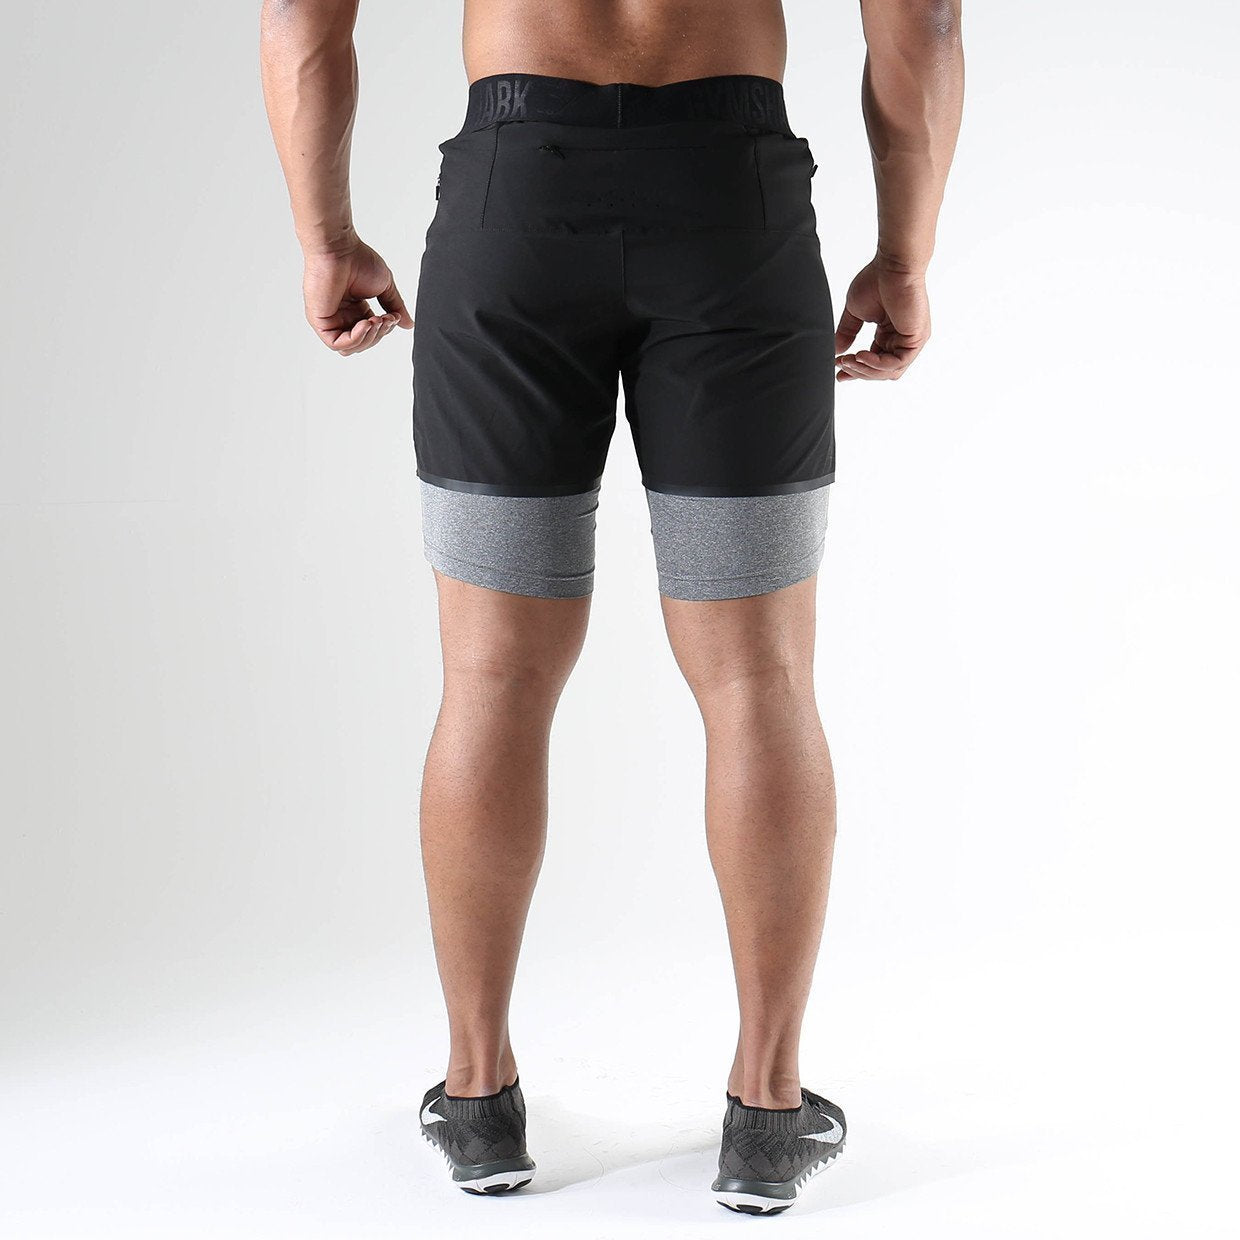 Enhance Shorts in Black - view 4